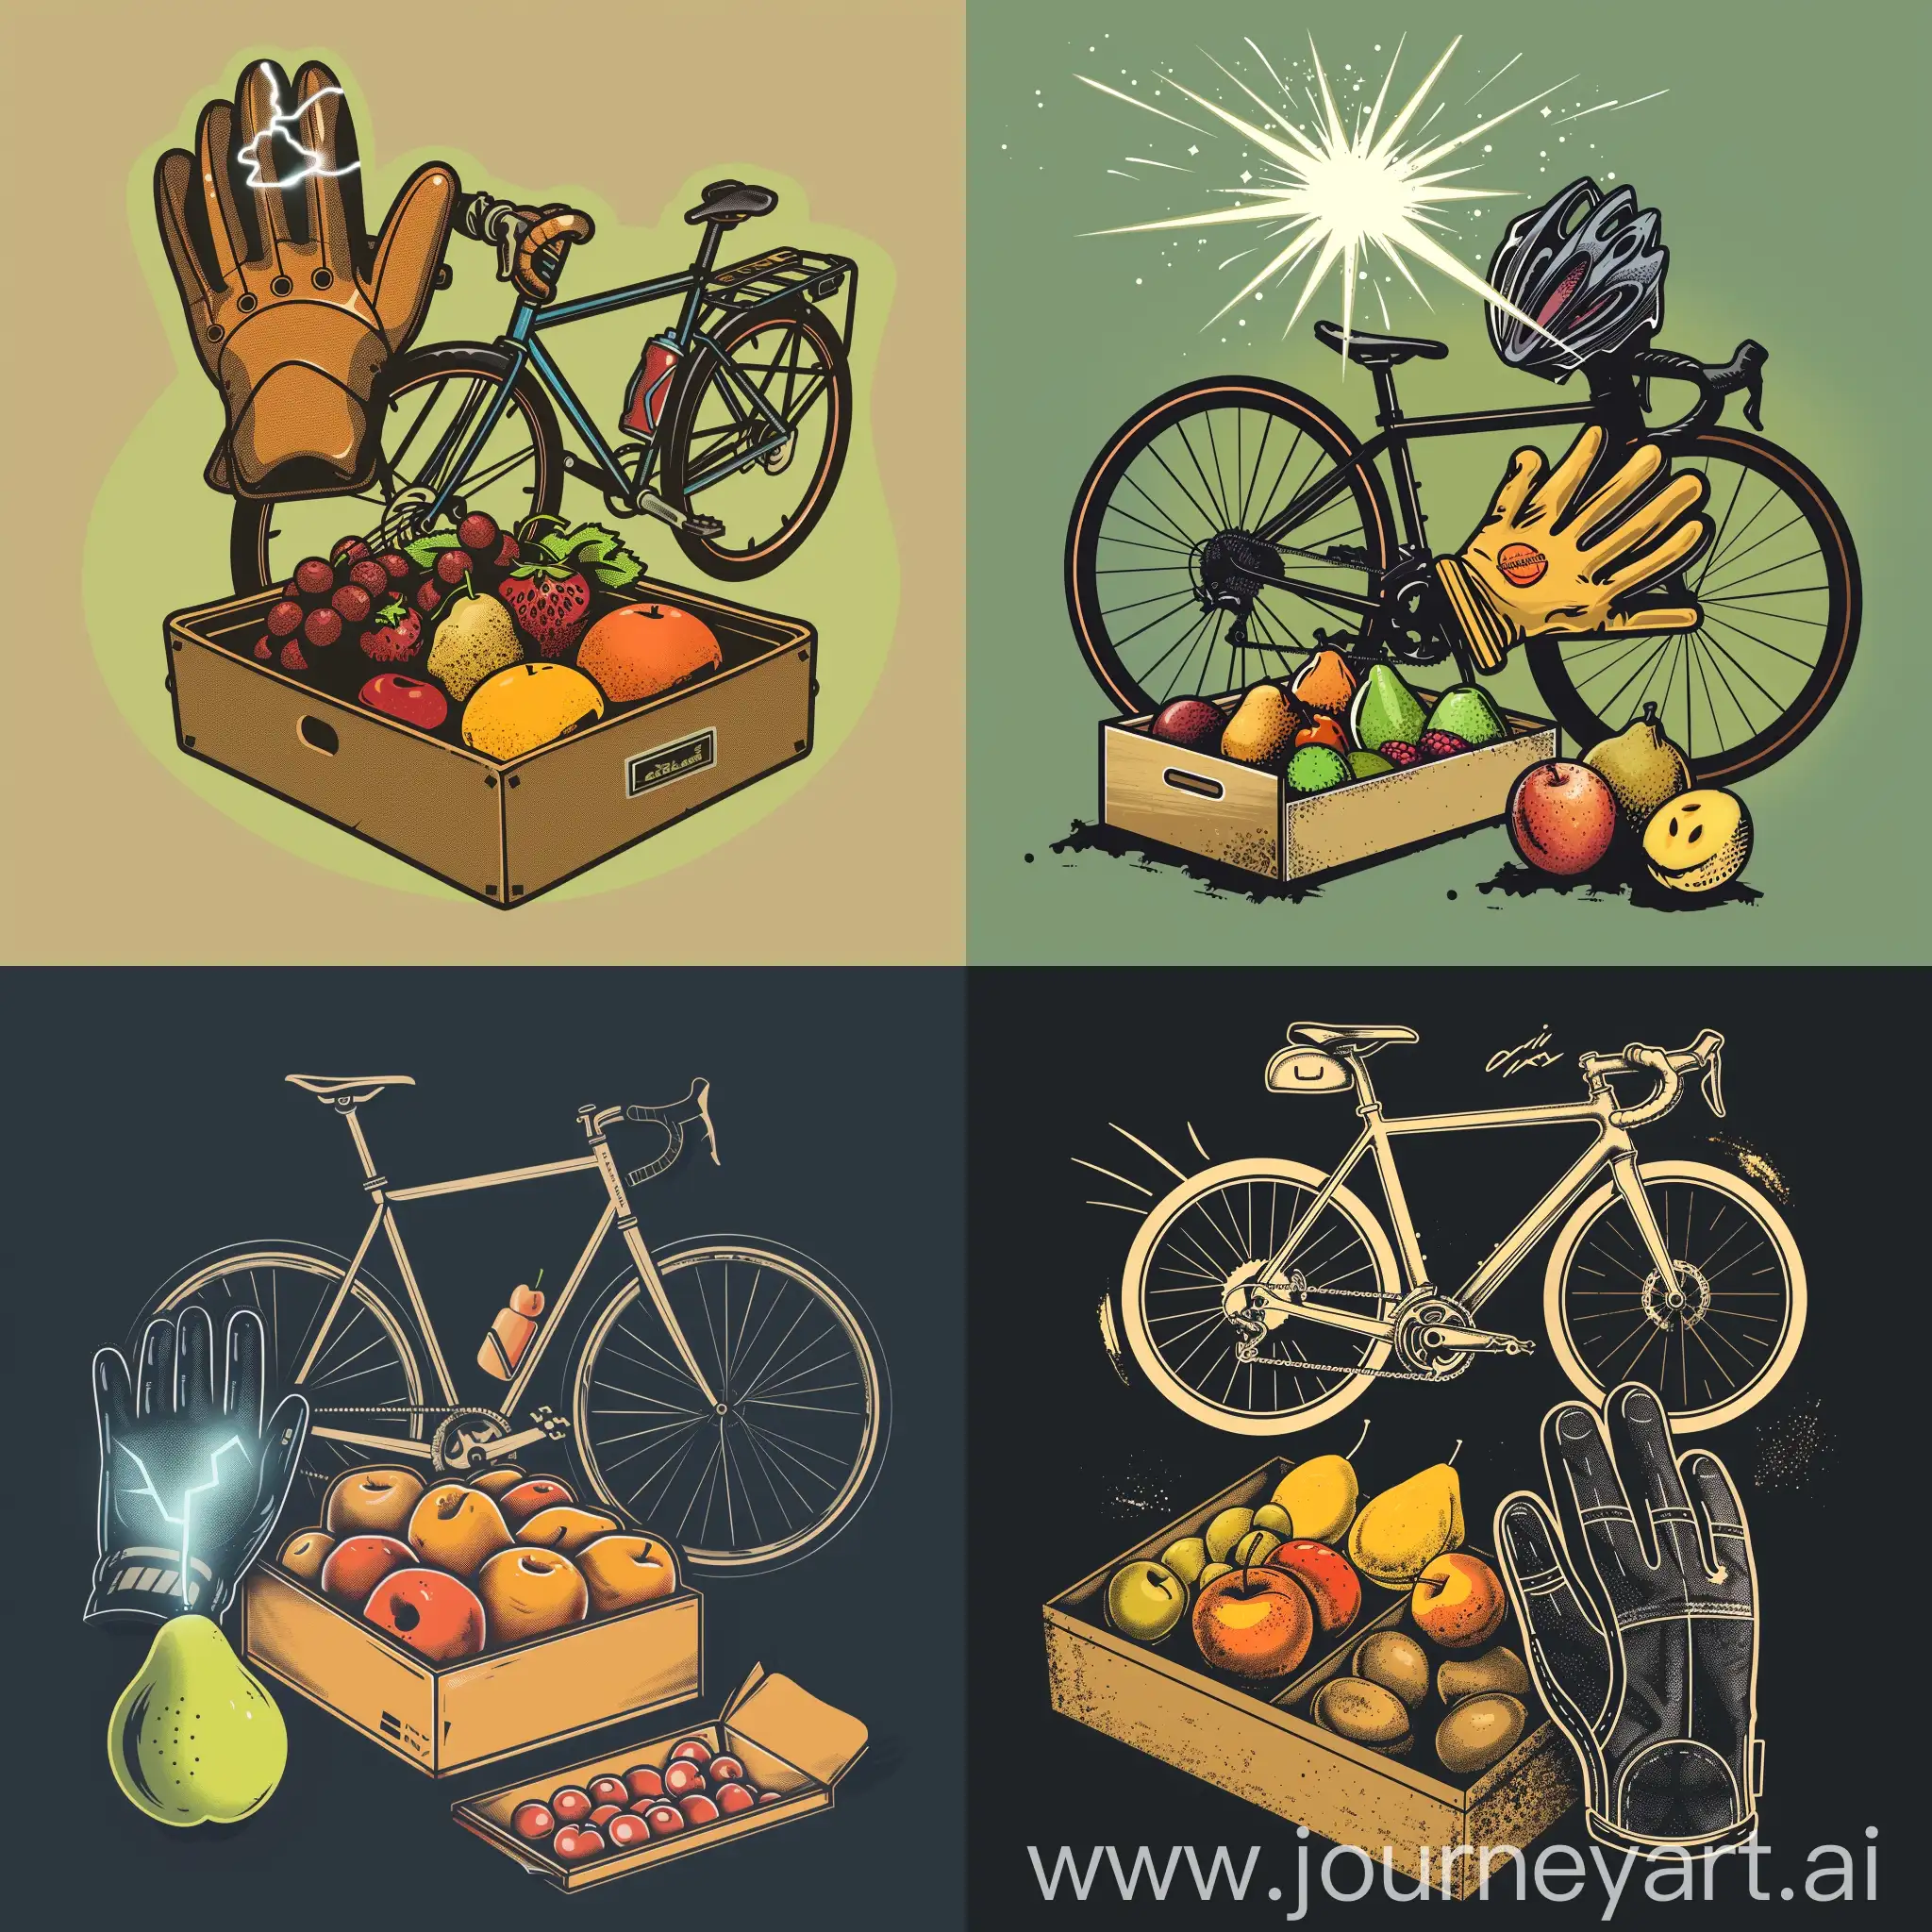 Outdoor-Adventure-Logo-with-Road-Bike-Electric-Ray-Glove-and-Fruit-Box